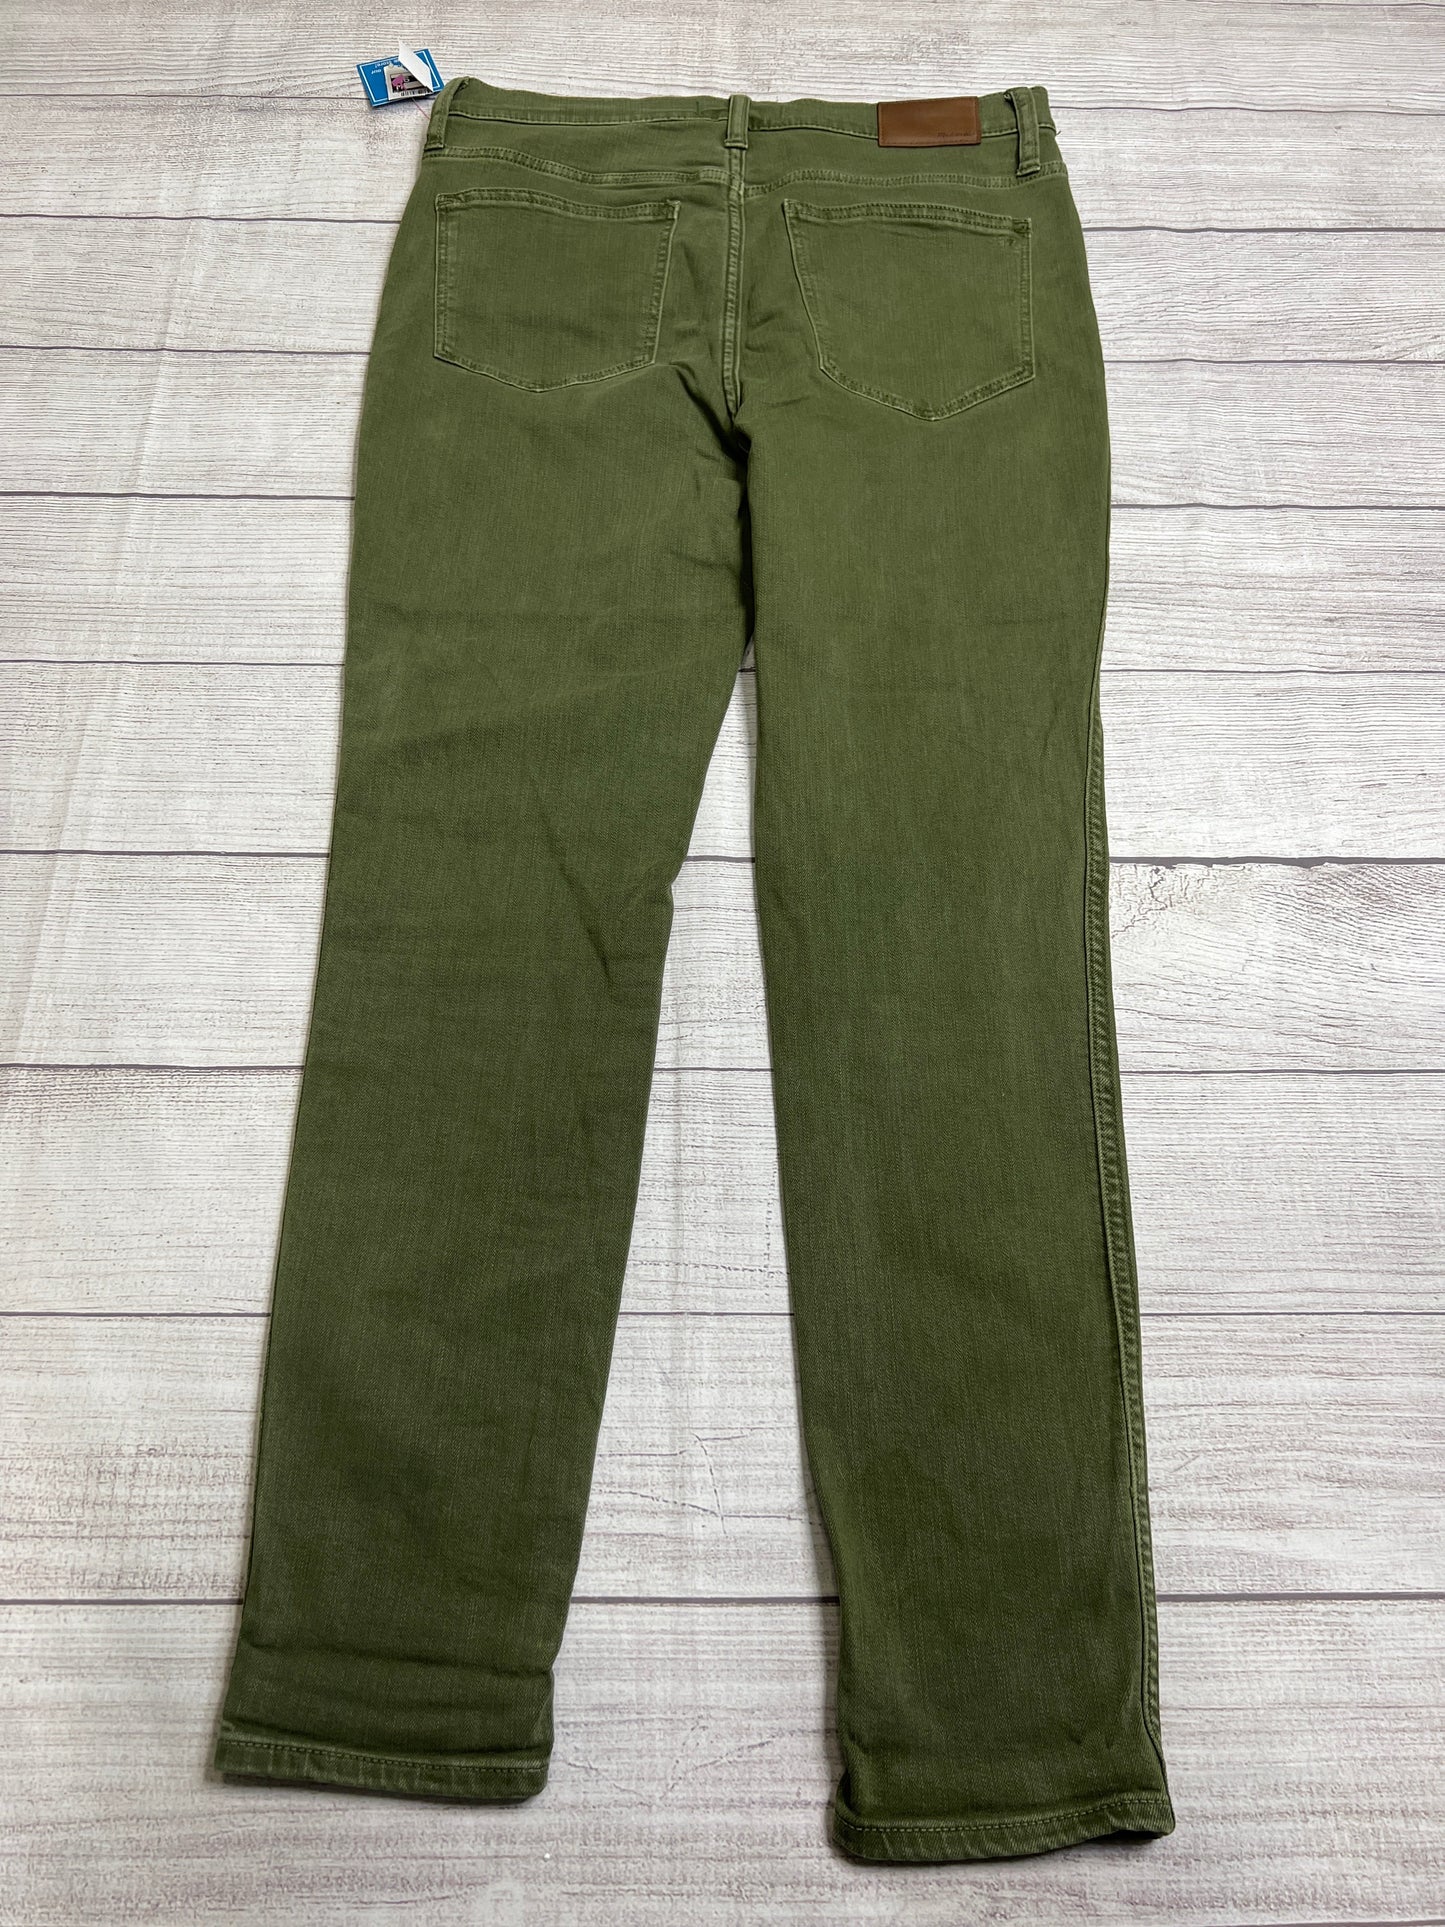 Jeans Skinny By Madewell  Size: 6/29